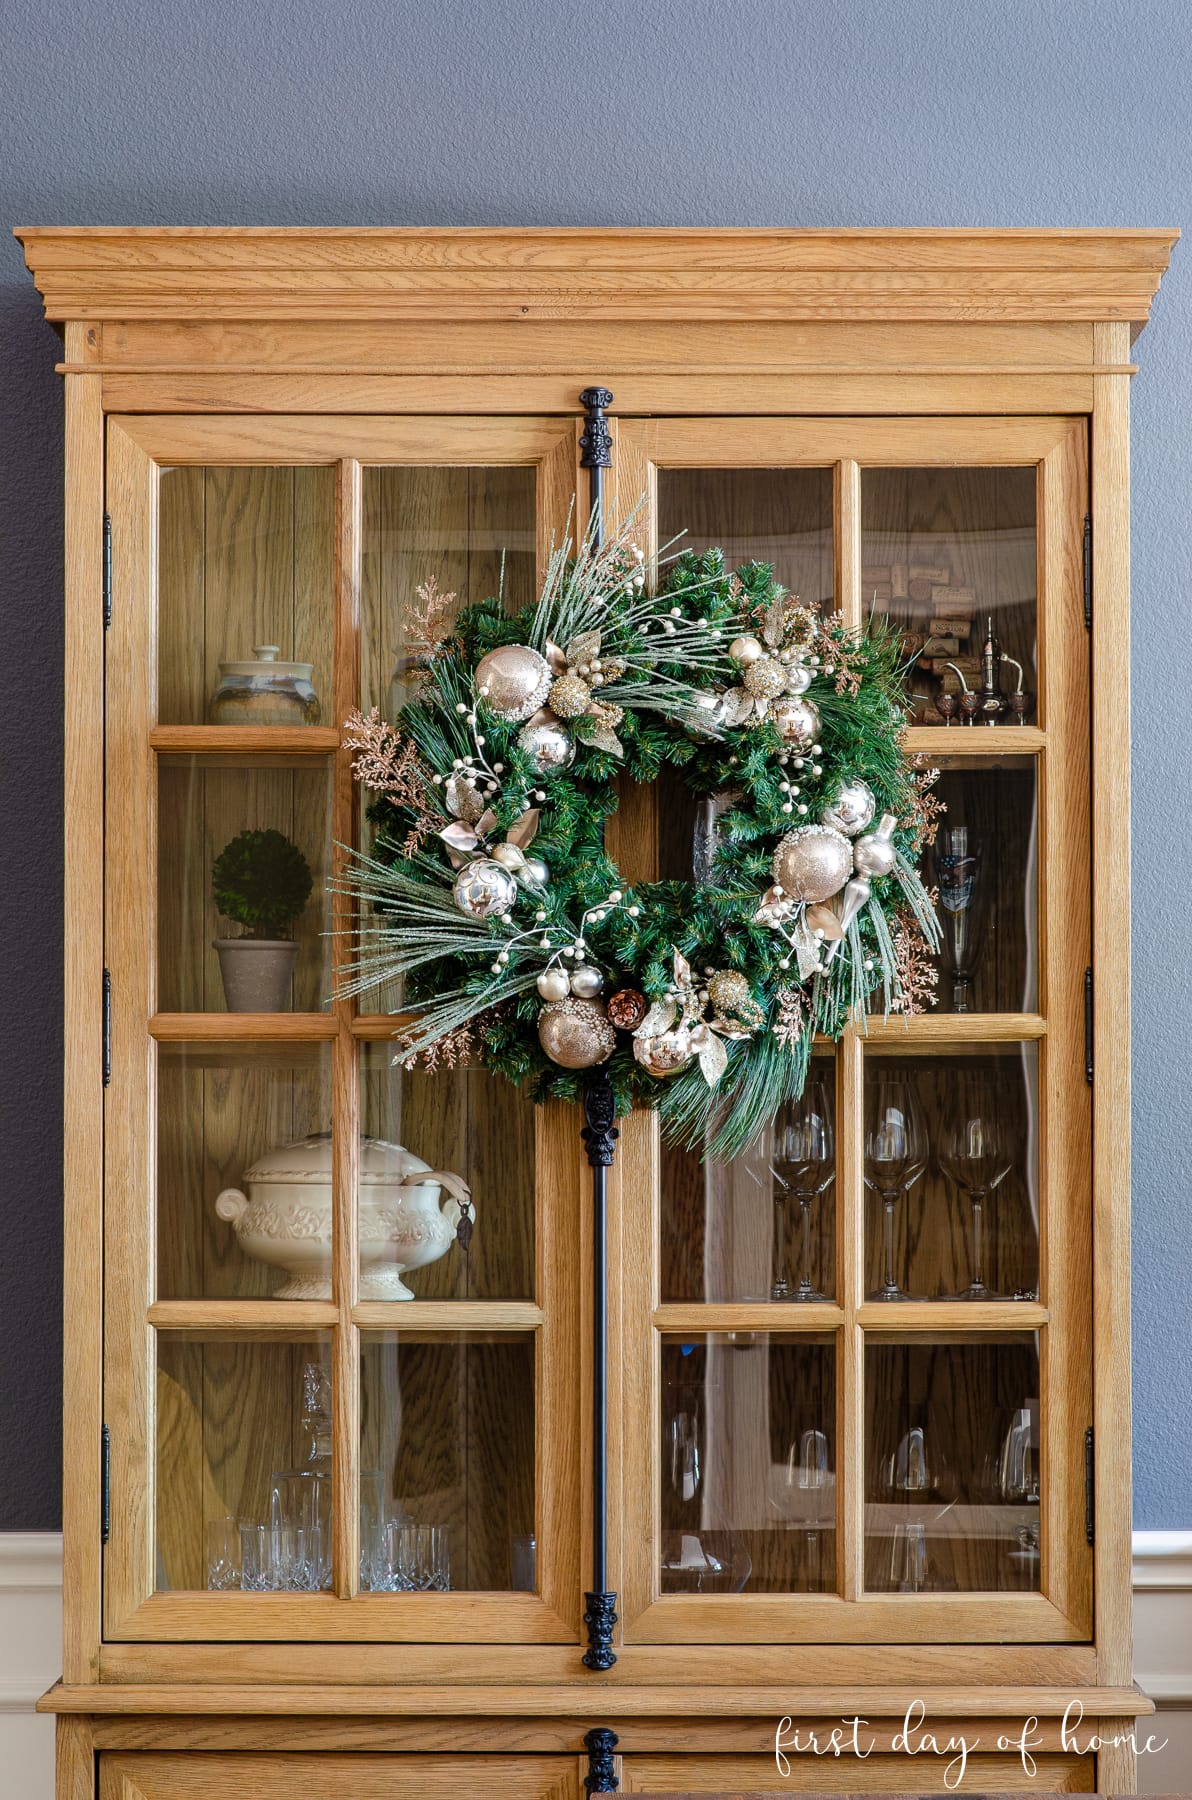 Christmas wreath with mercury glass ornaments inspired by Frontgate hanging on a cabinet in a dining room.